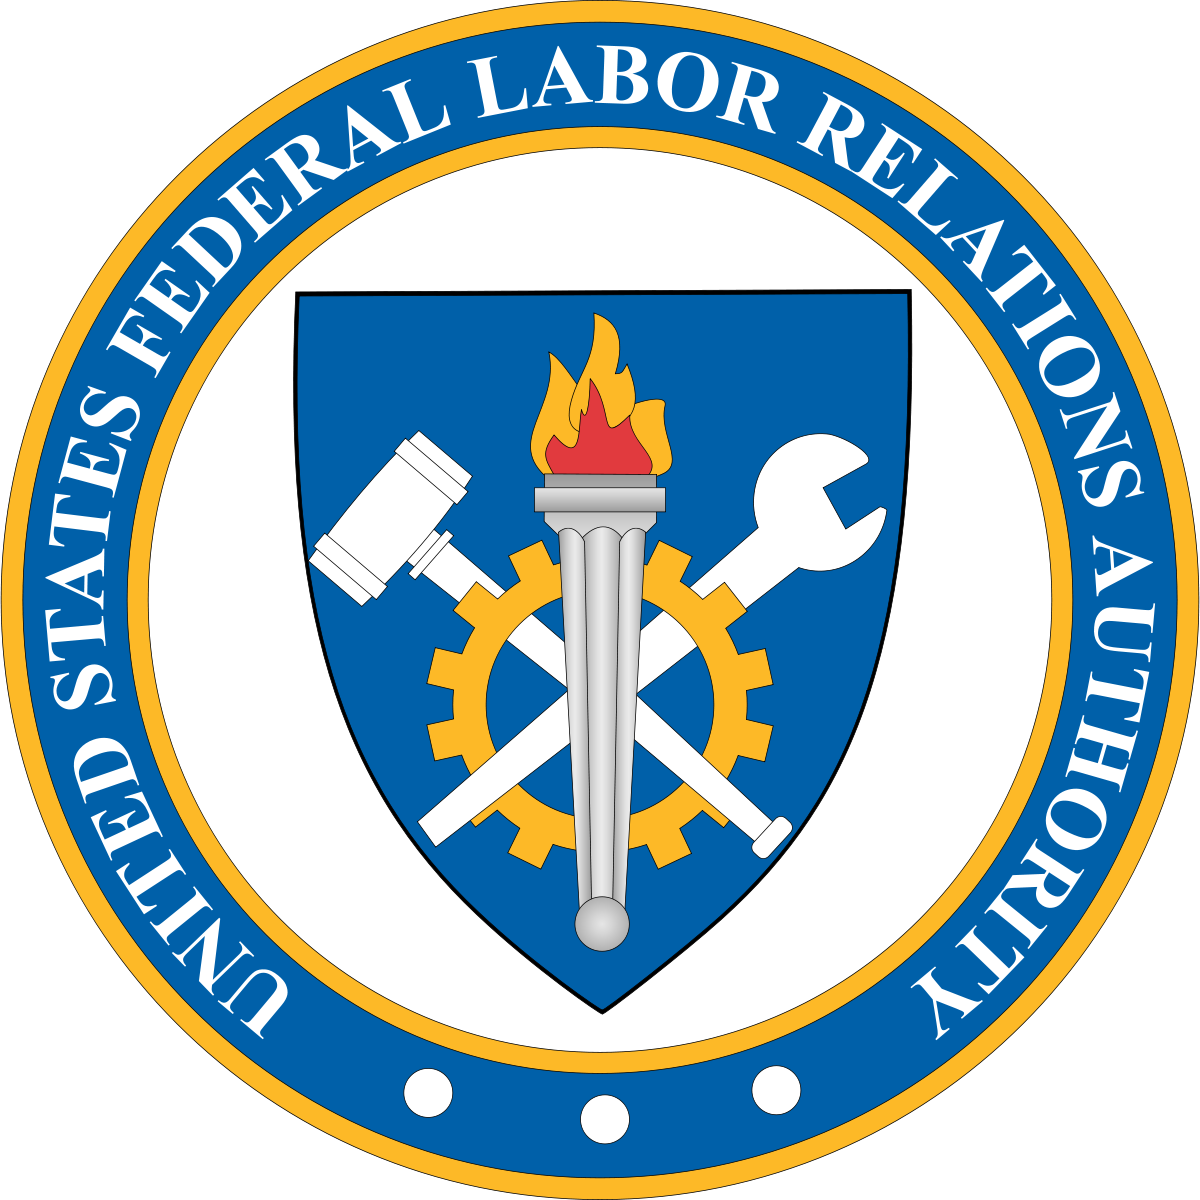 Official seal for the United States Federal Labor Relations Authority (FLRA)